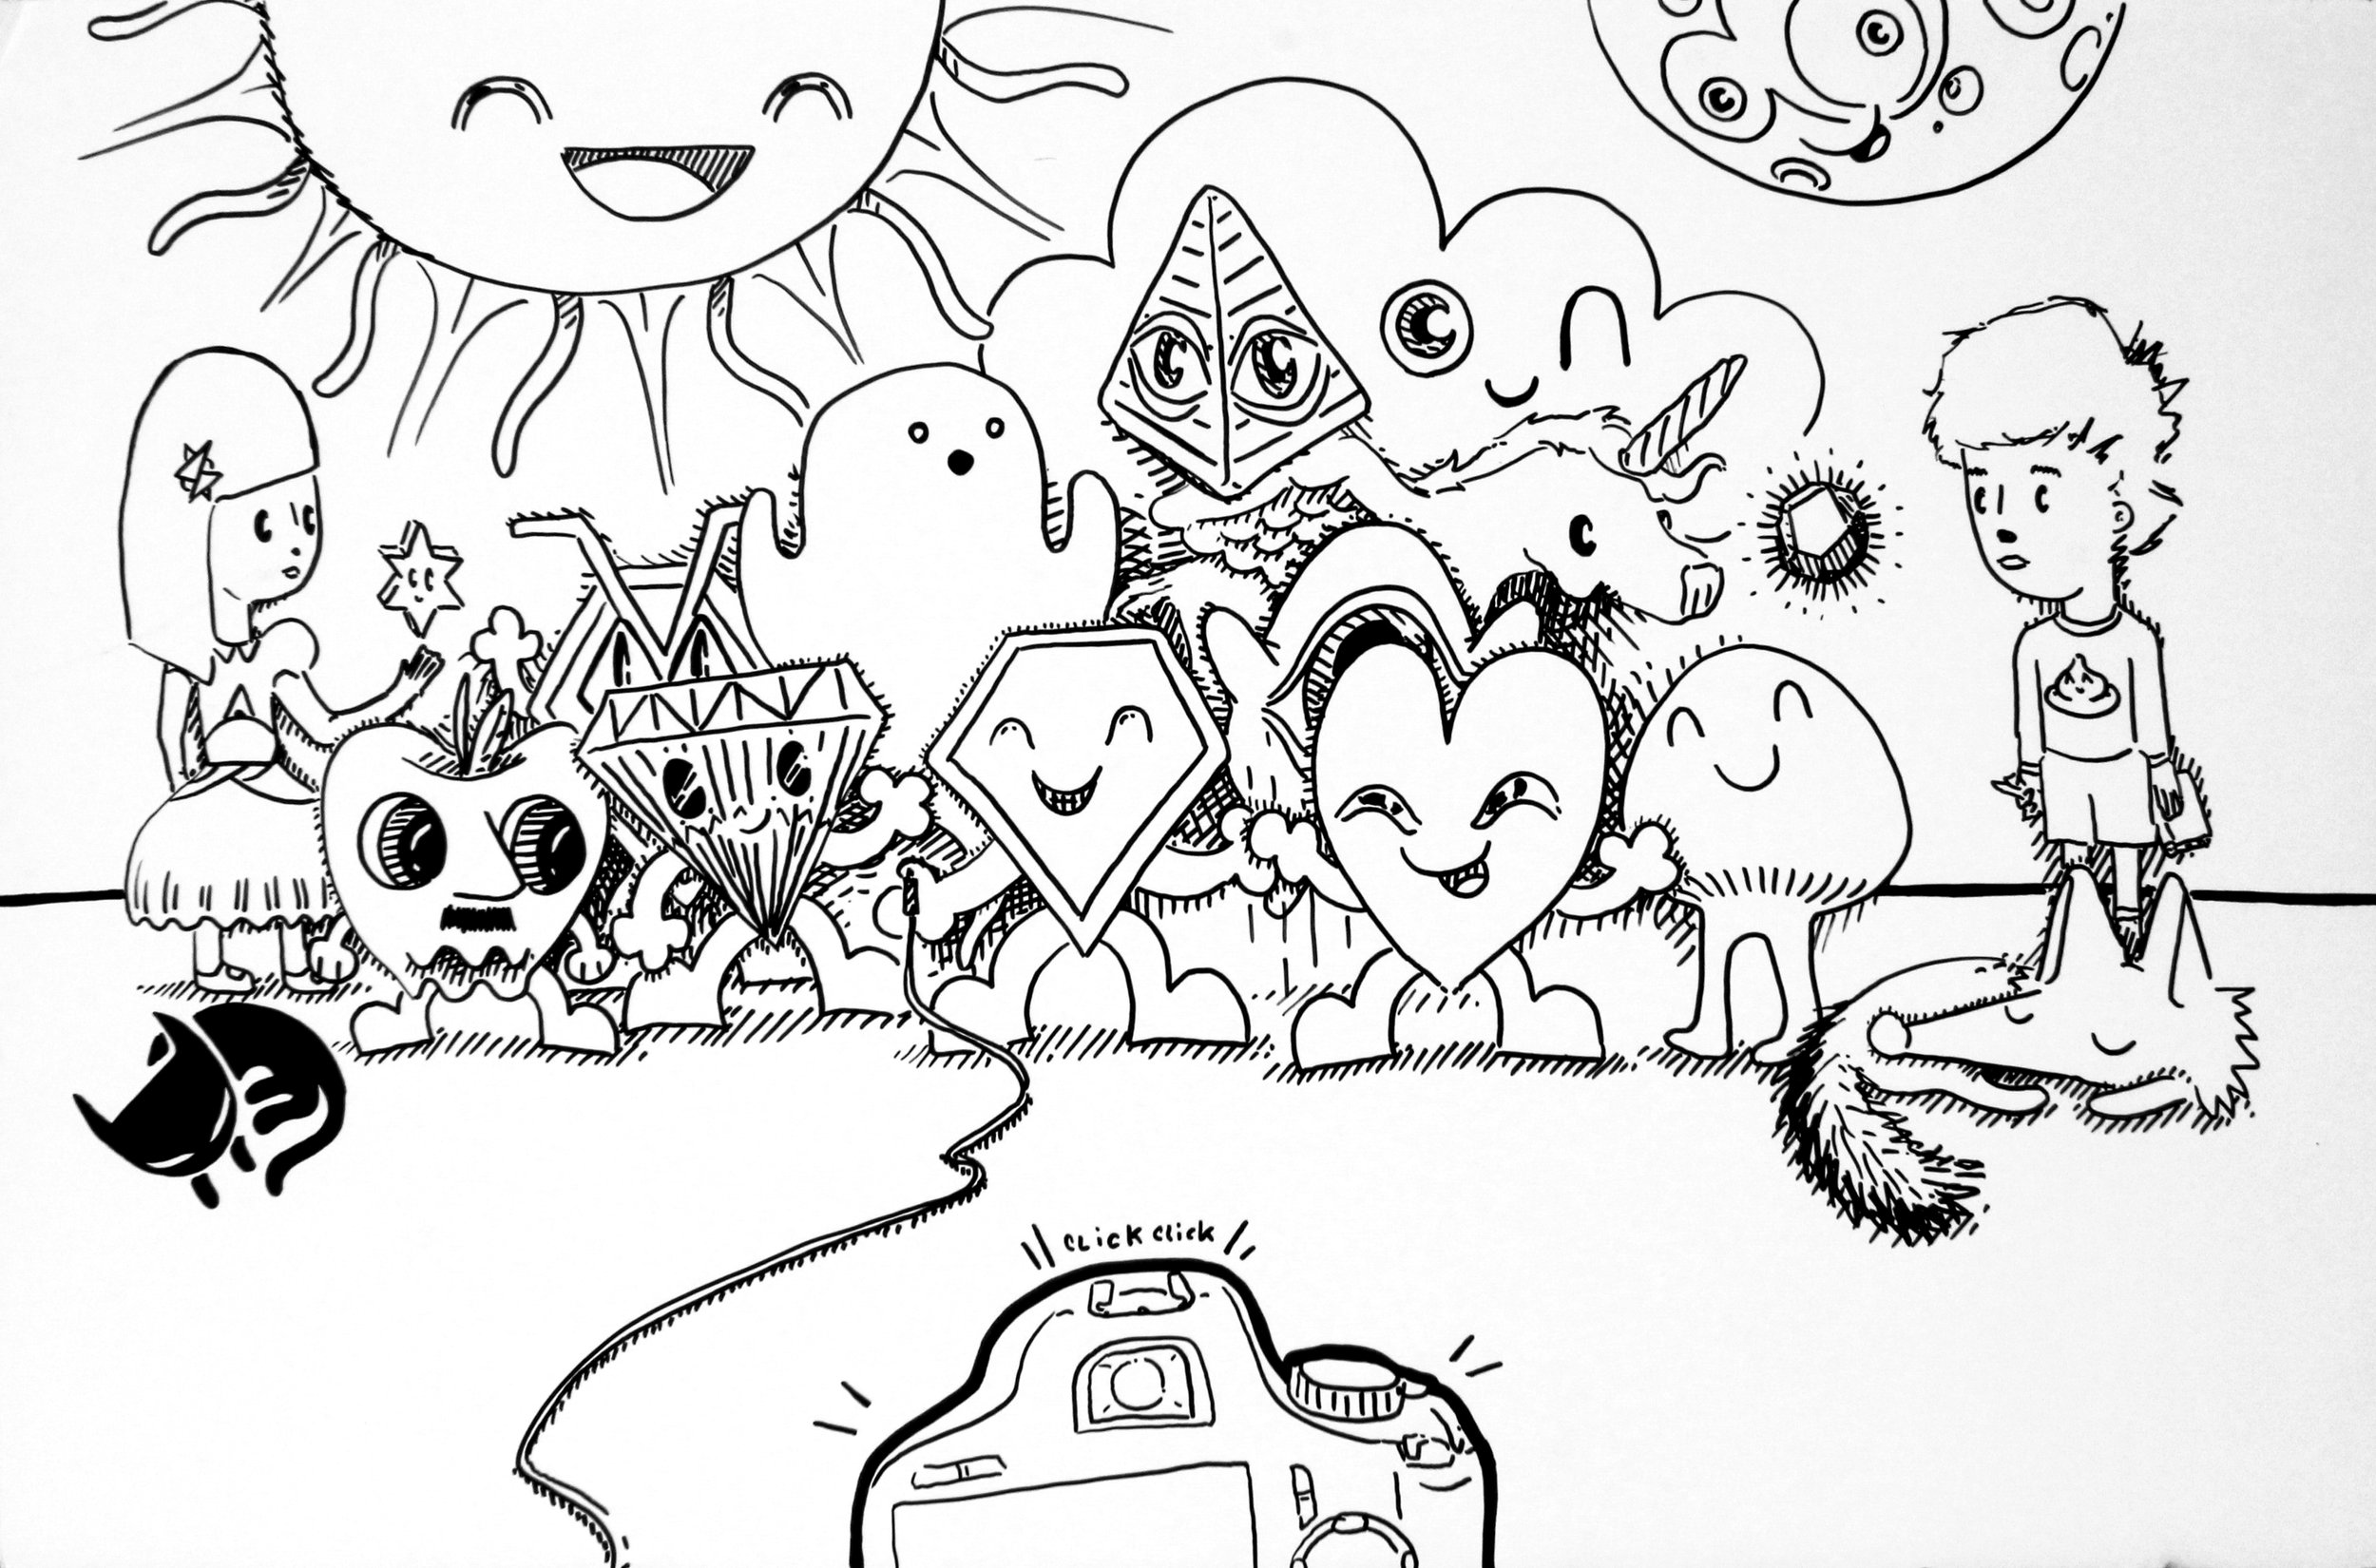   Group Photo  ink on paper. 2014    owned by Private Collector   